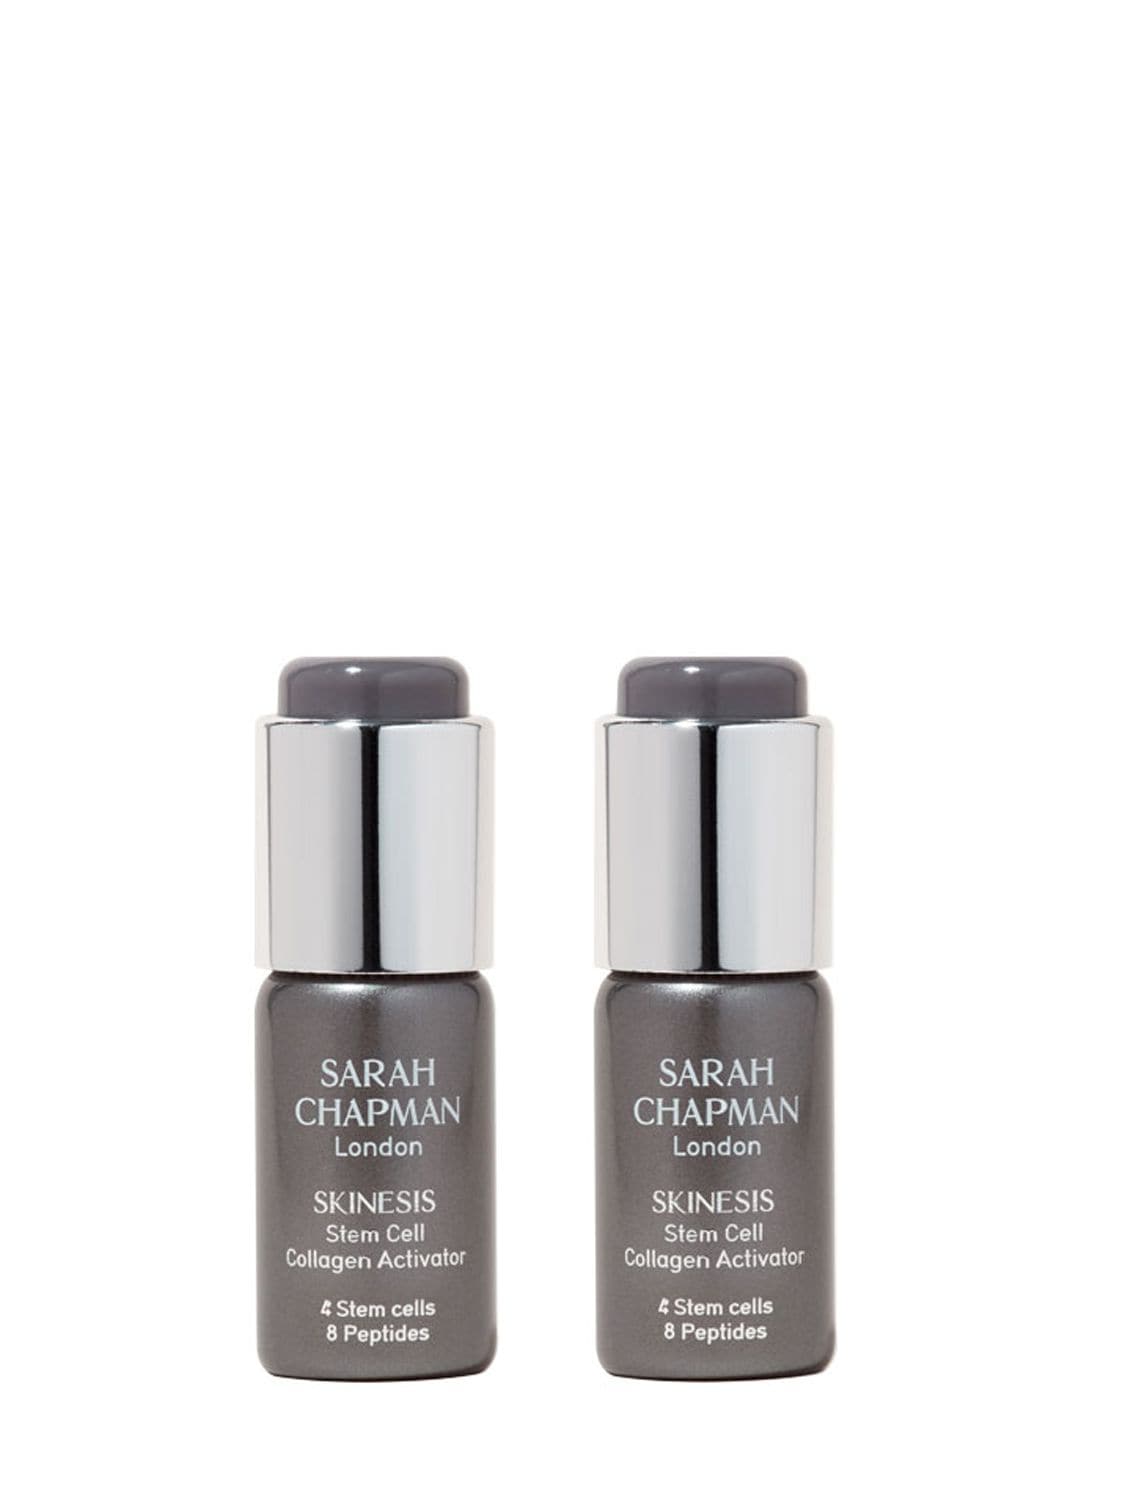 Image of 2x10ml Stem Cell Collagen Activator Duo